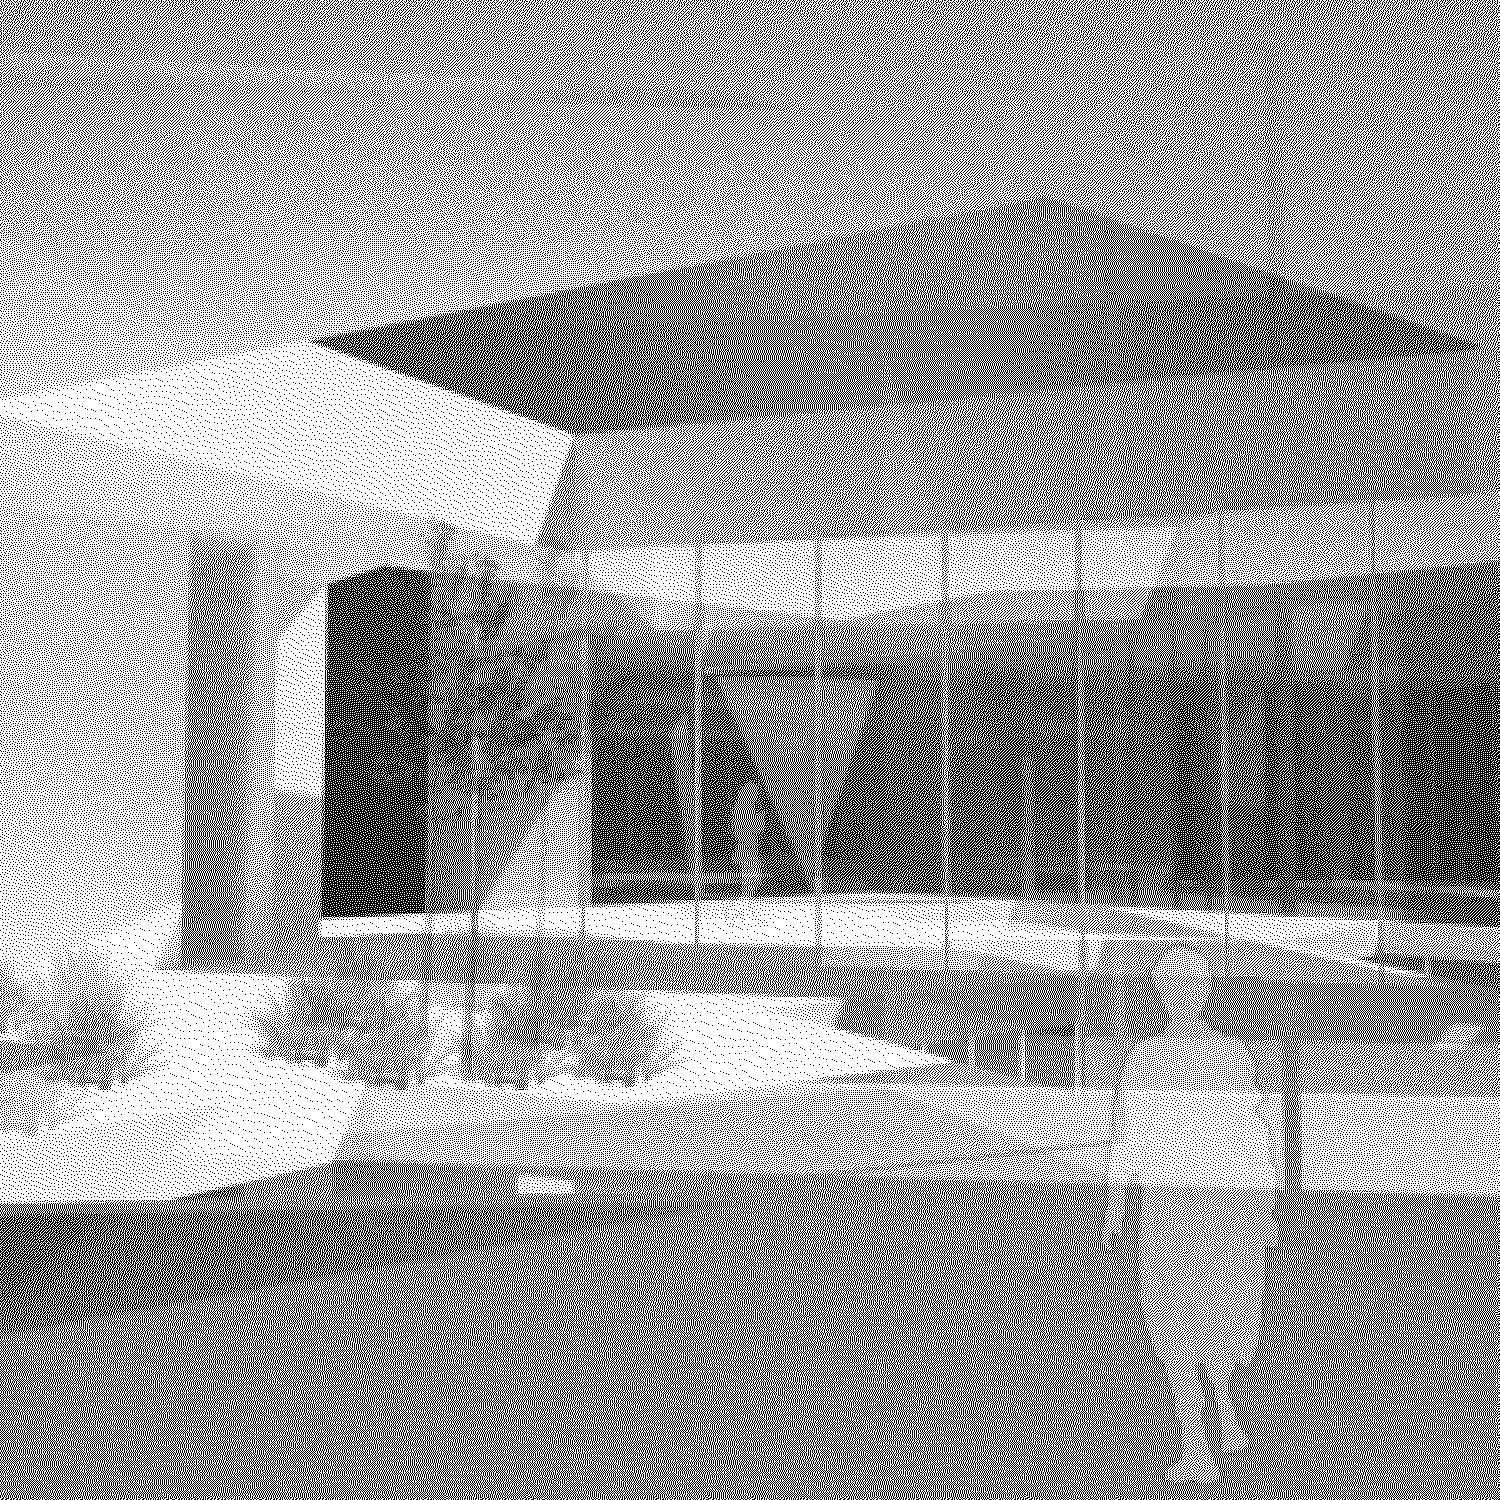 Monochrome 3D render of courtyard area, with people outlines for scale.